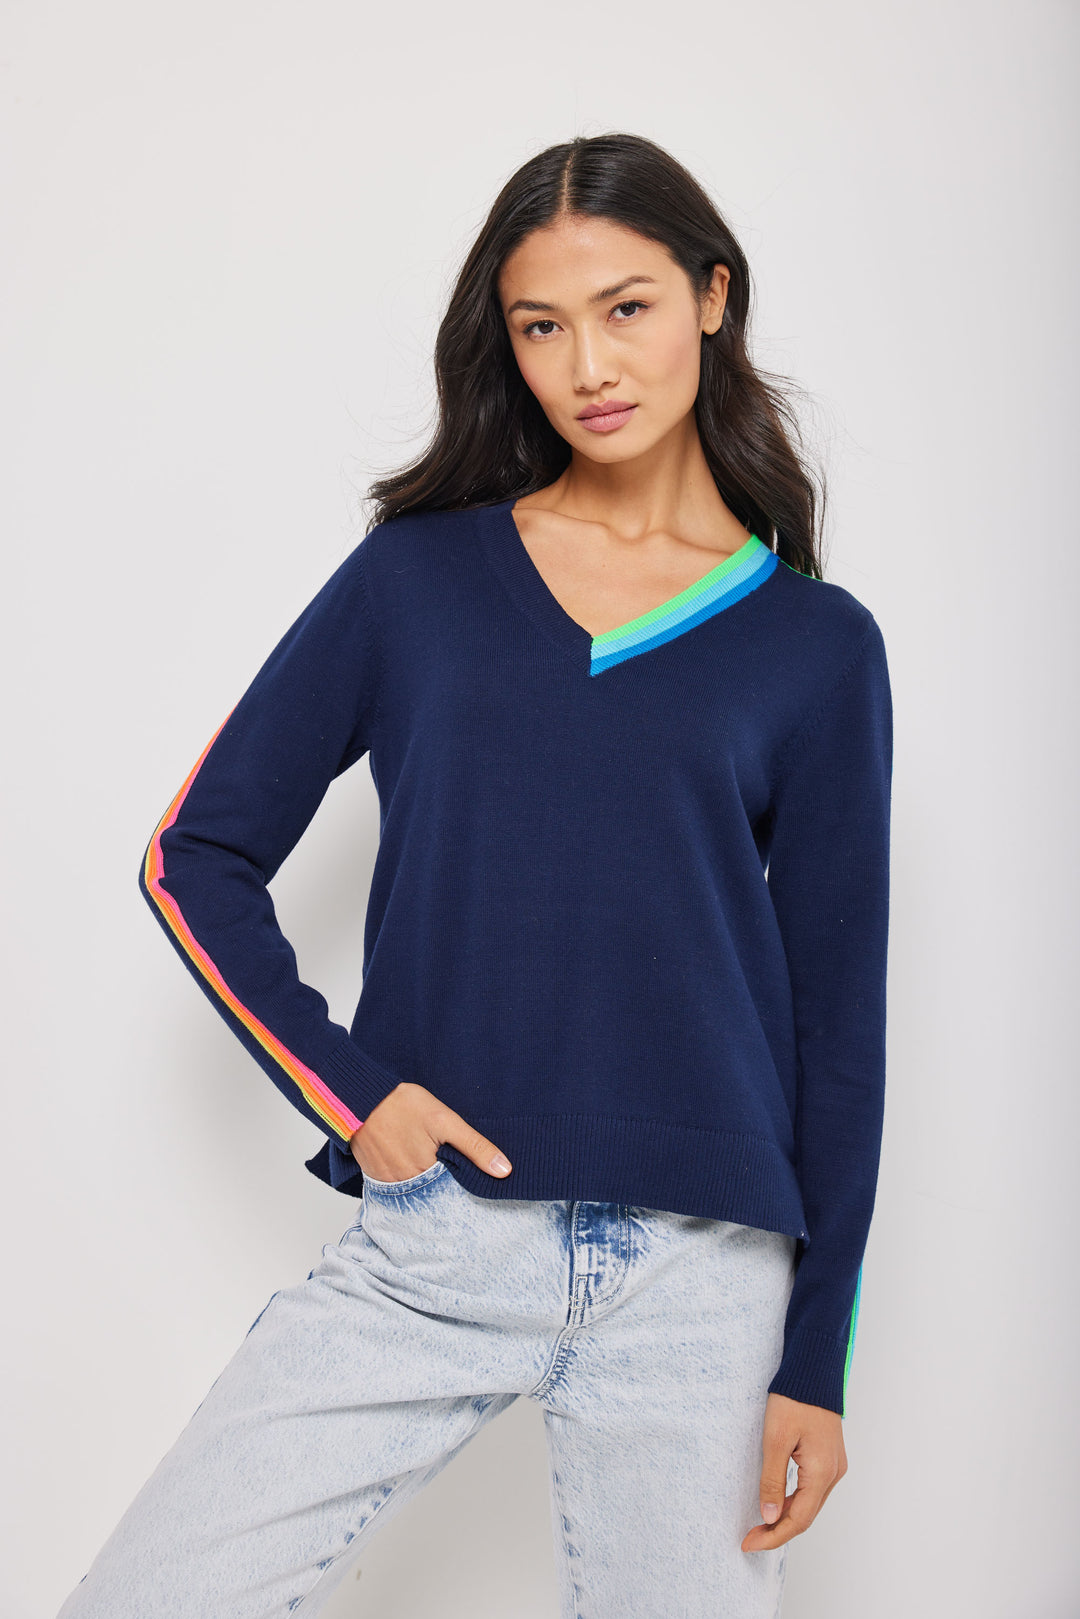 Lisa Todd Color Code Sweater